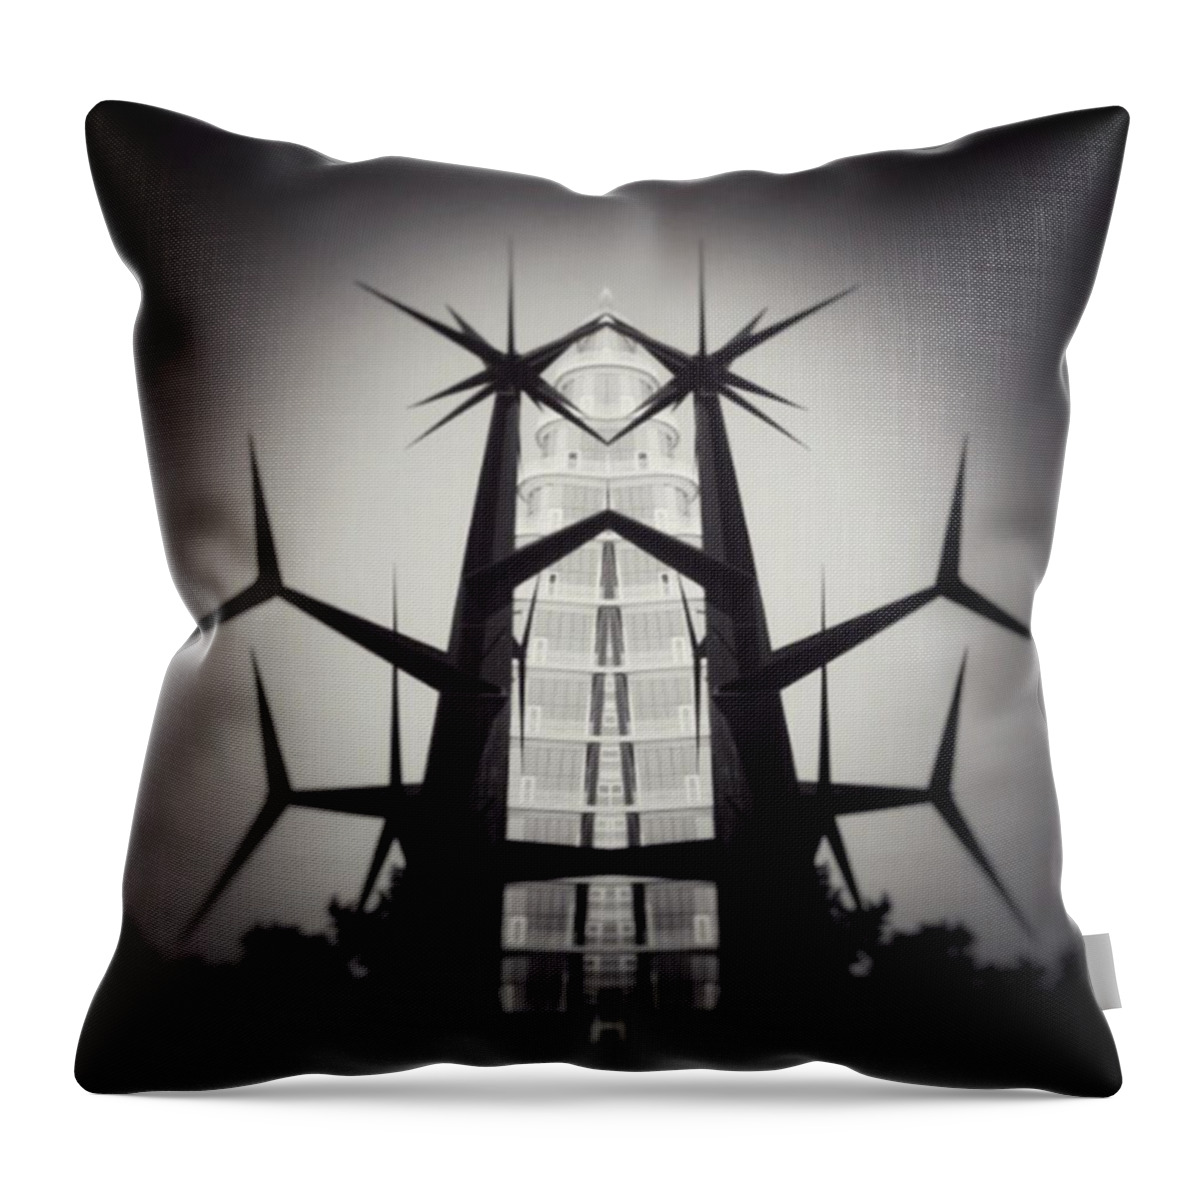 Urban Throw Pillow featuring the photograph Protected by Jorge Ferreira